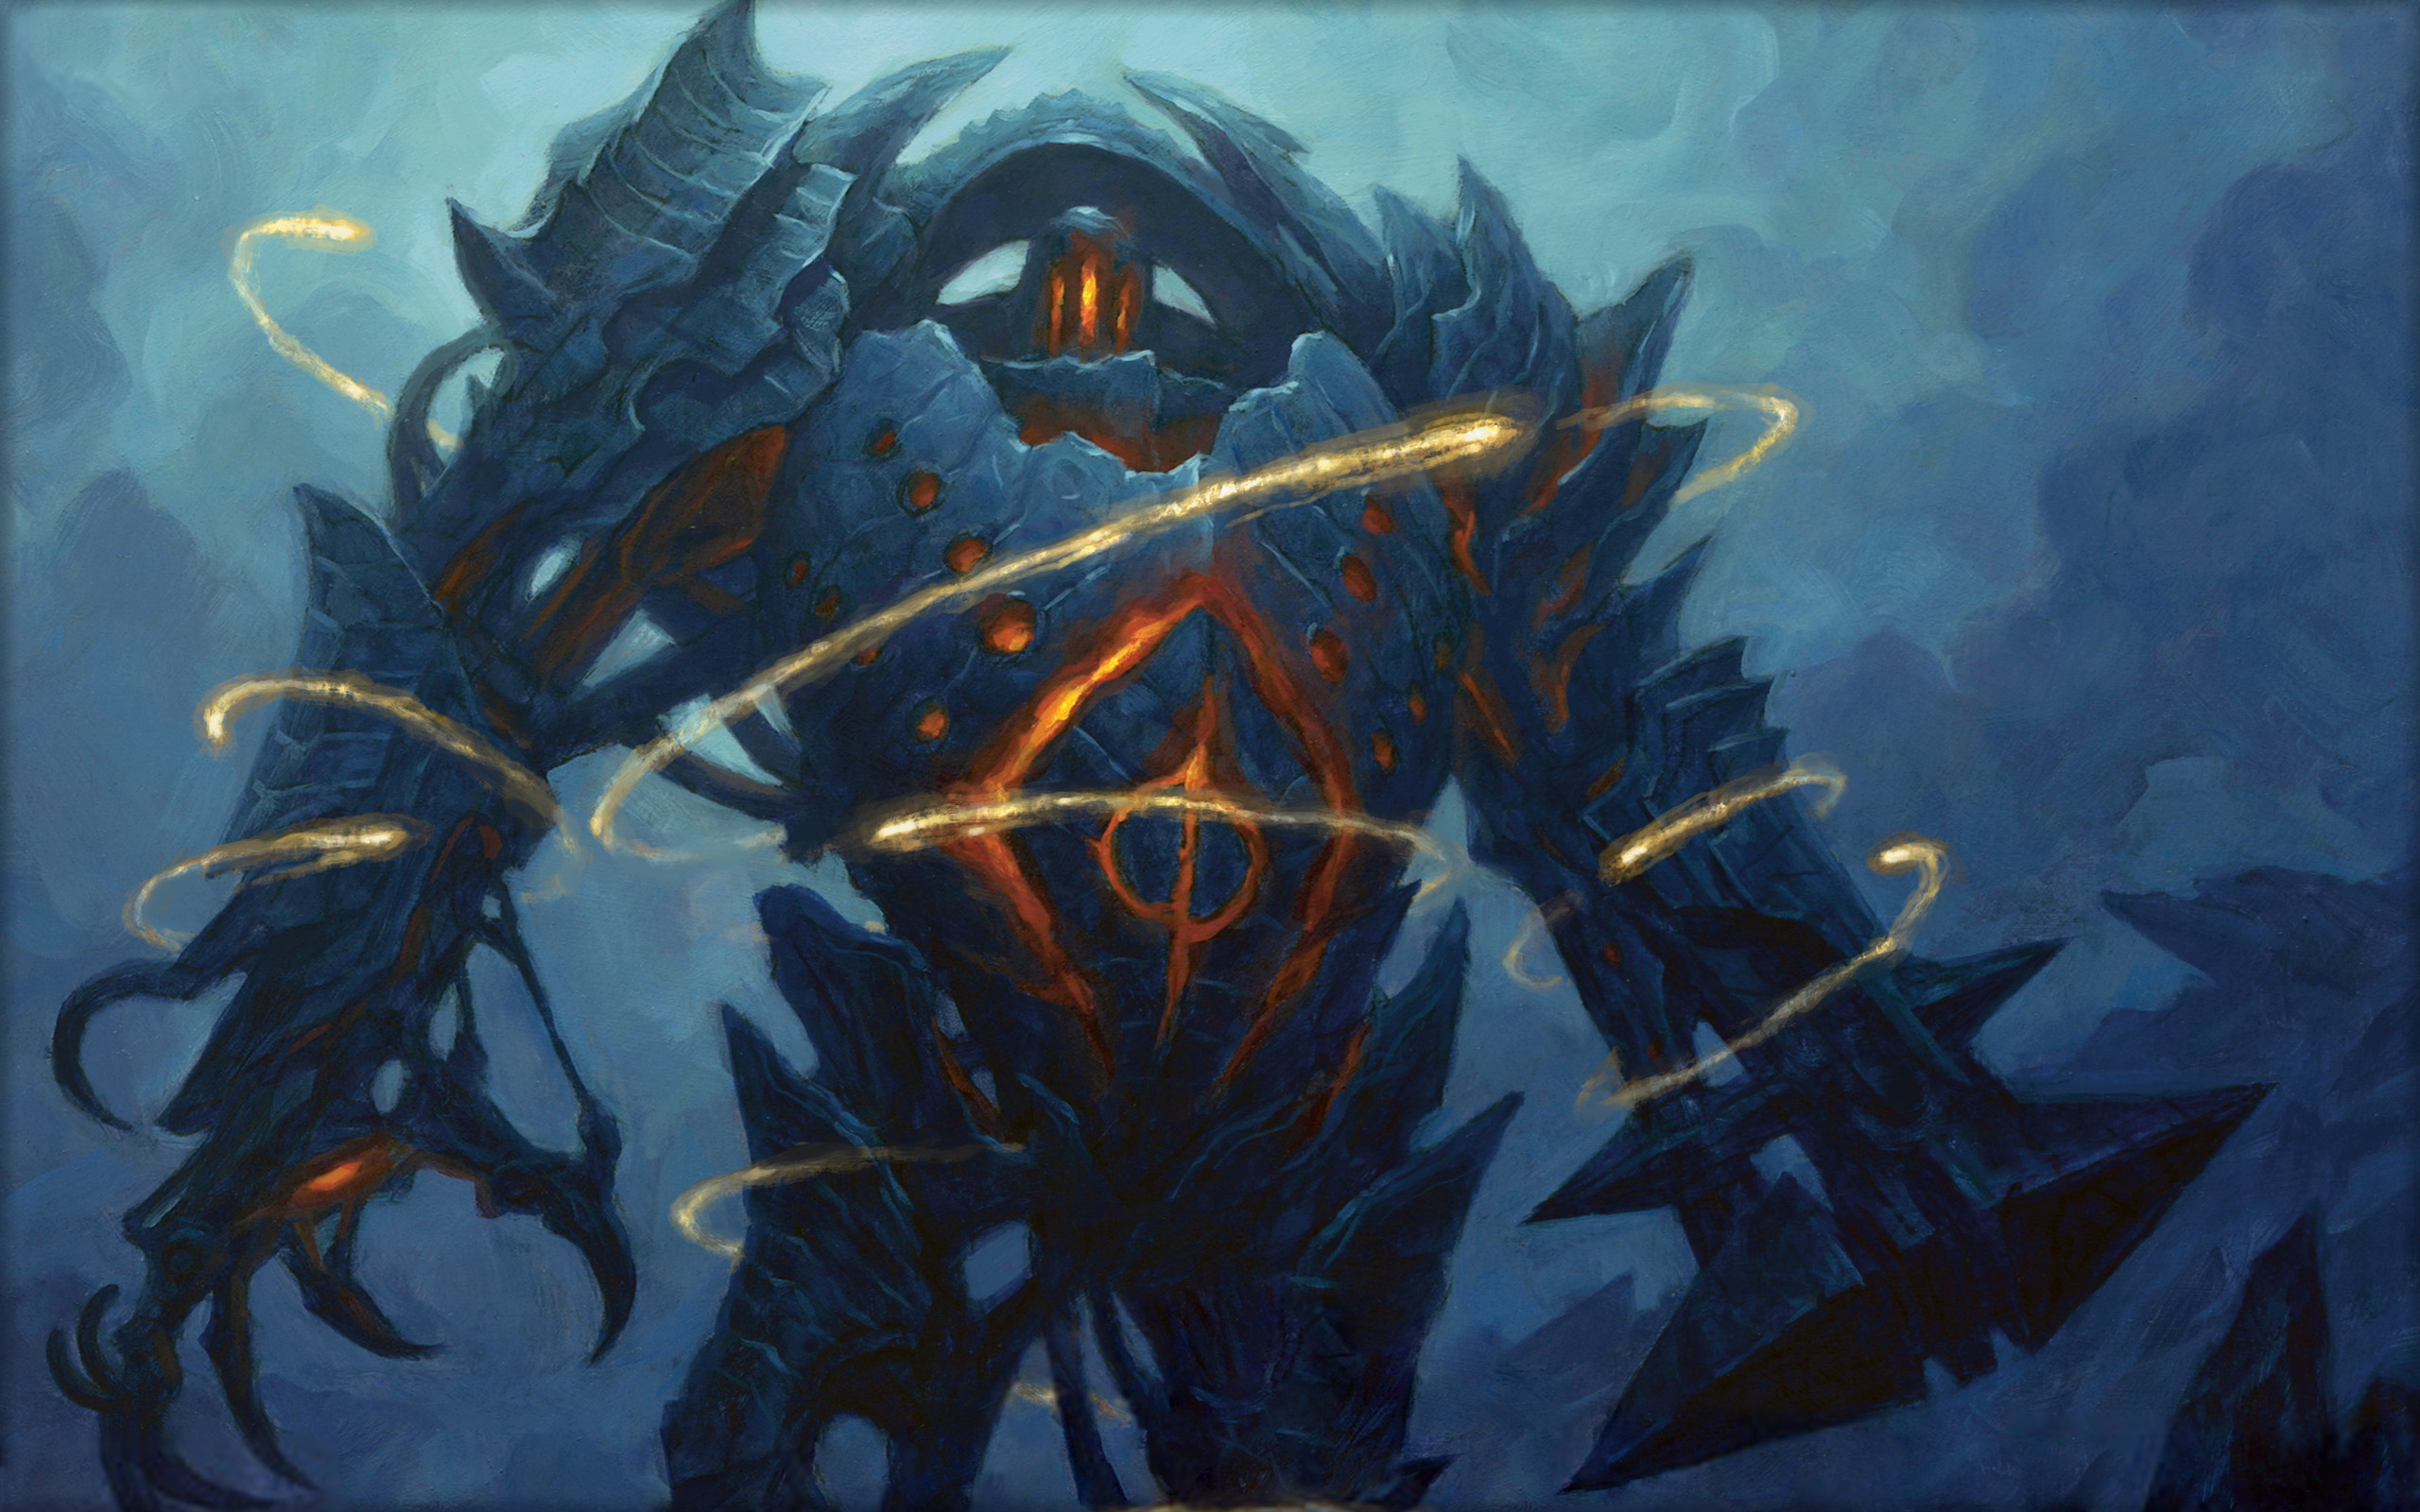 1000+ MTG desktop backgrounds to Show Your Love for Magic: The Gathering